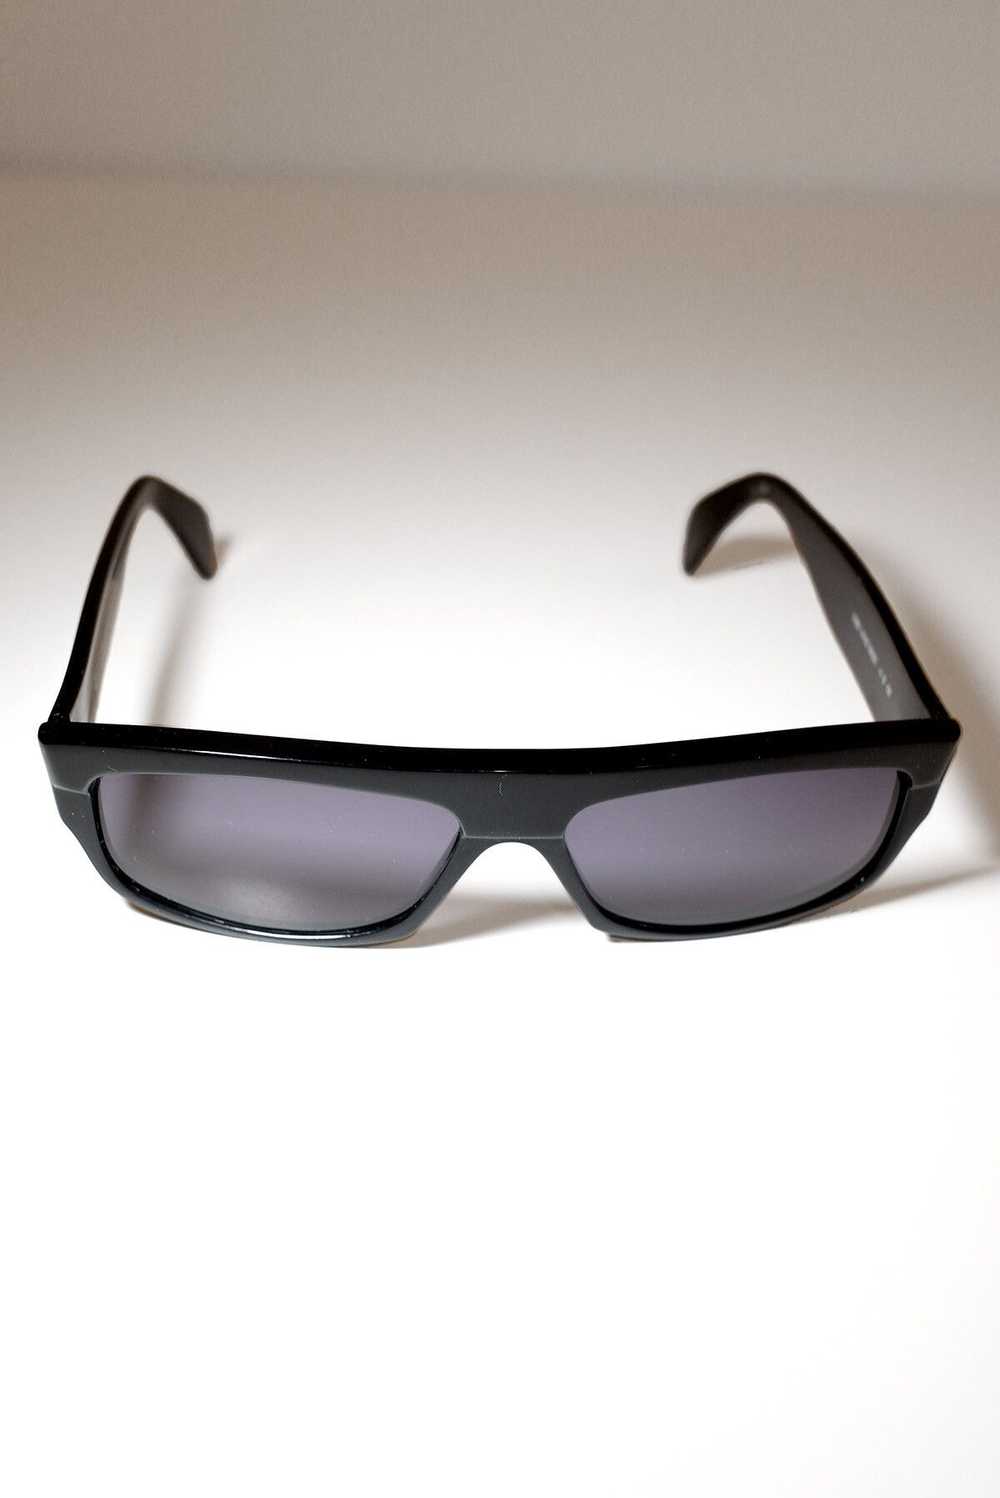 Cutler And Gross Vintage 80's / 90's Sunglasses - image 3